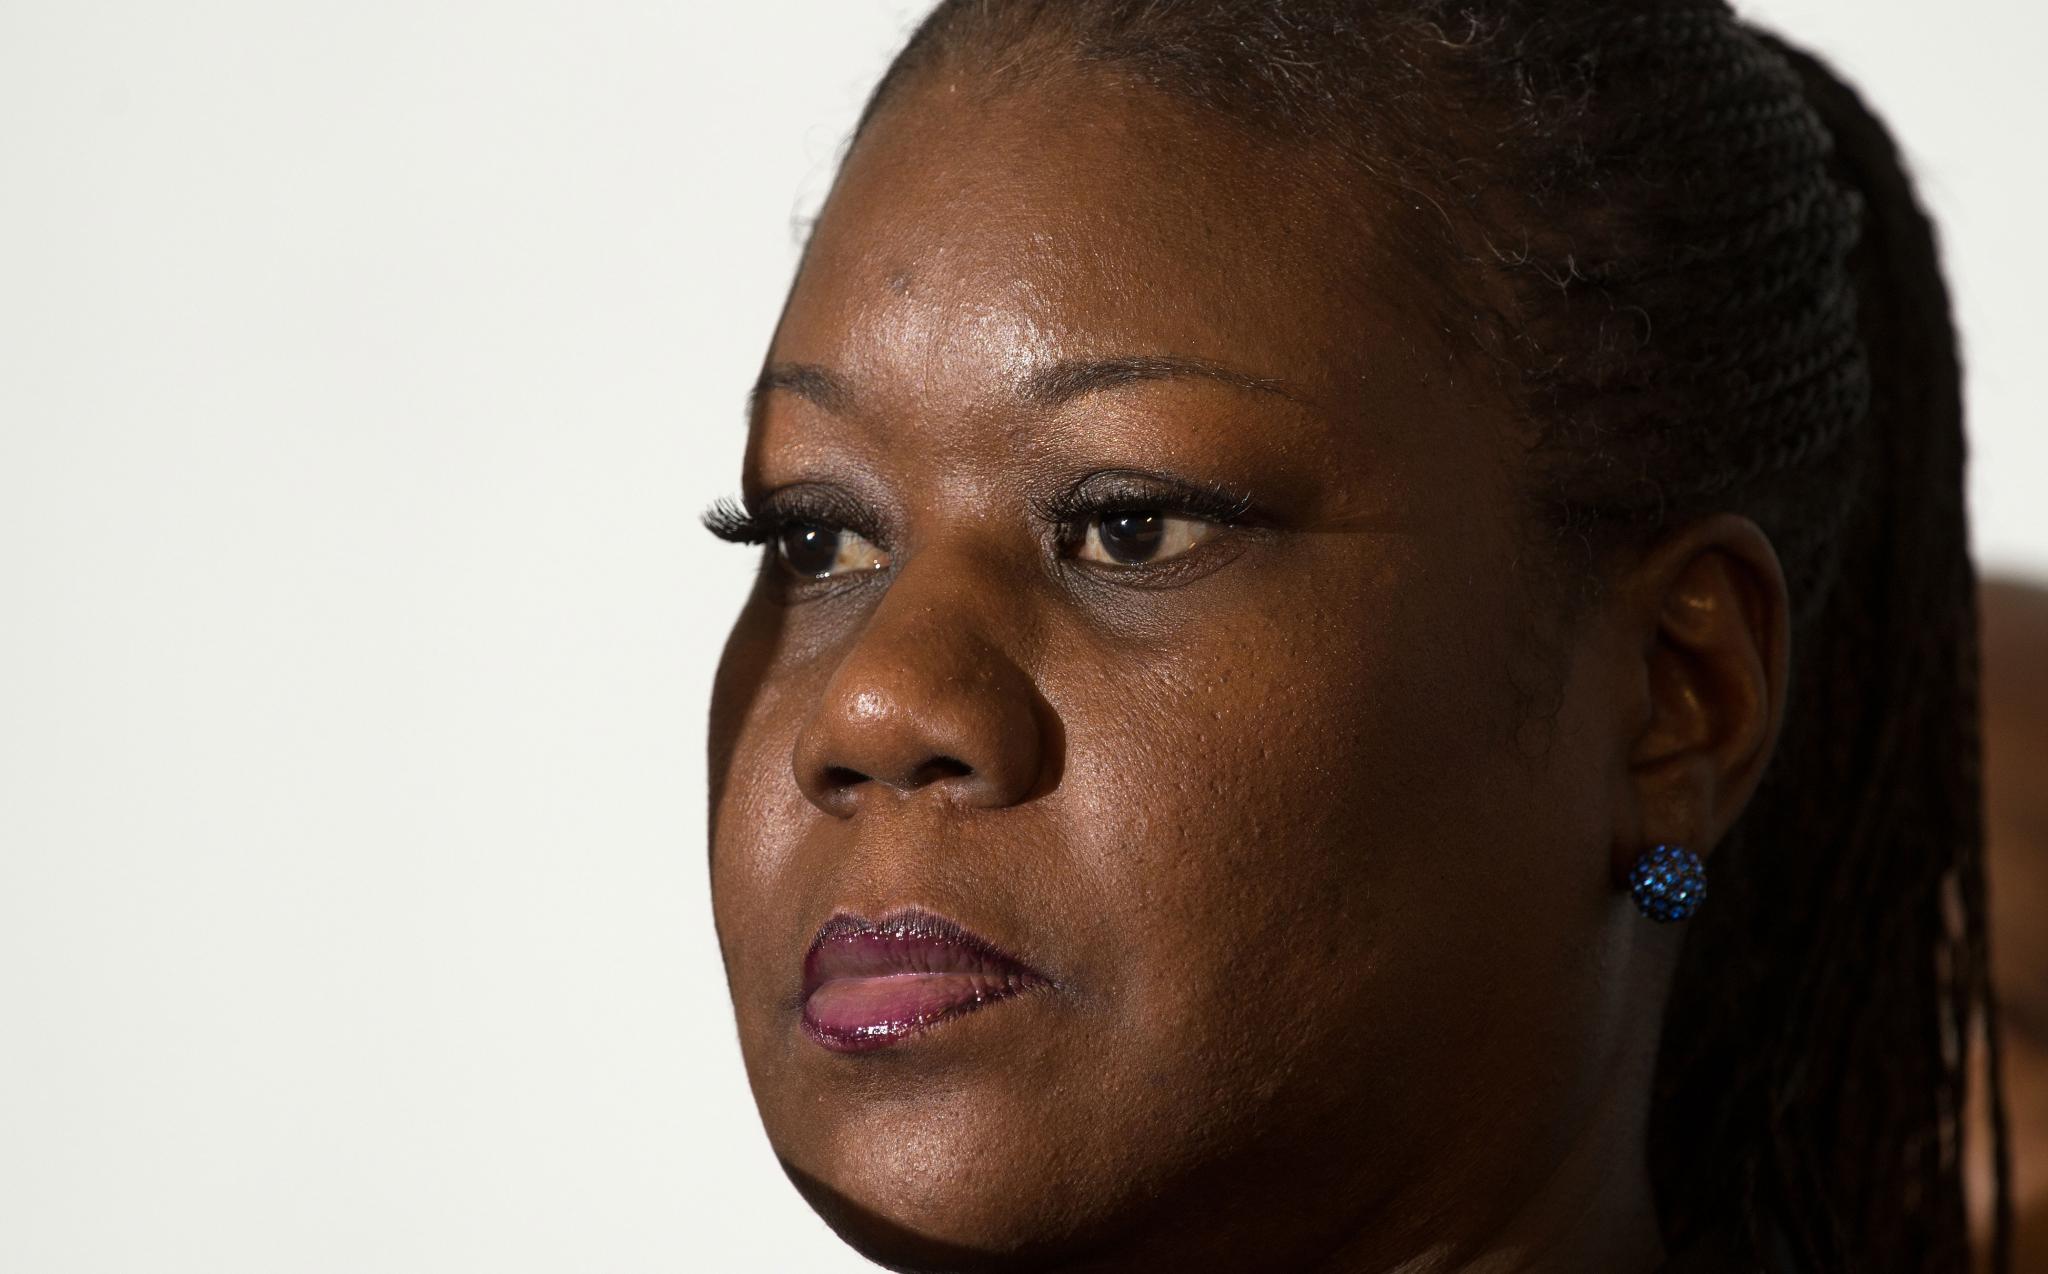 EXCLUSIVE: Trayvon Martin's Mother Wants 'Justice' in 2013